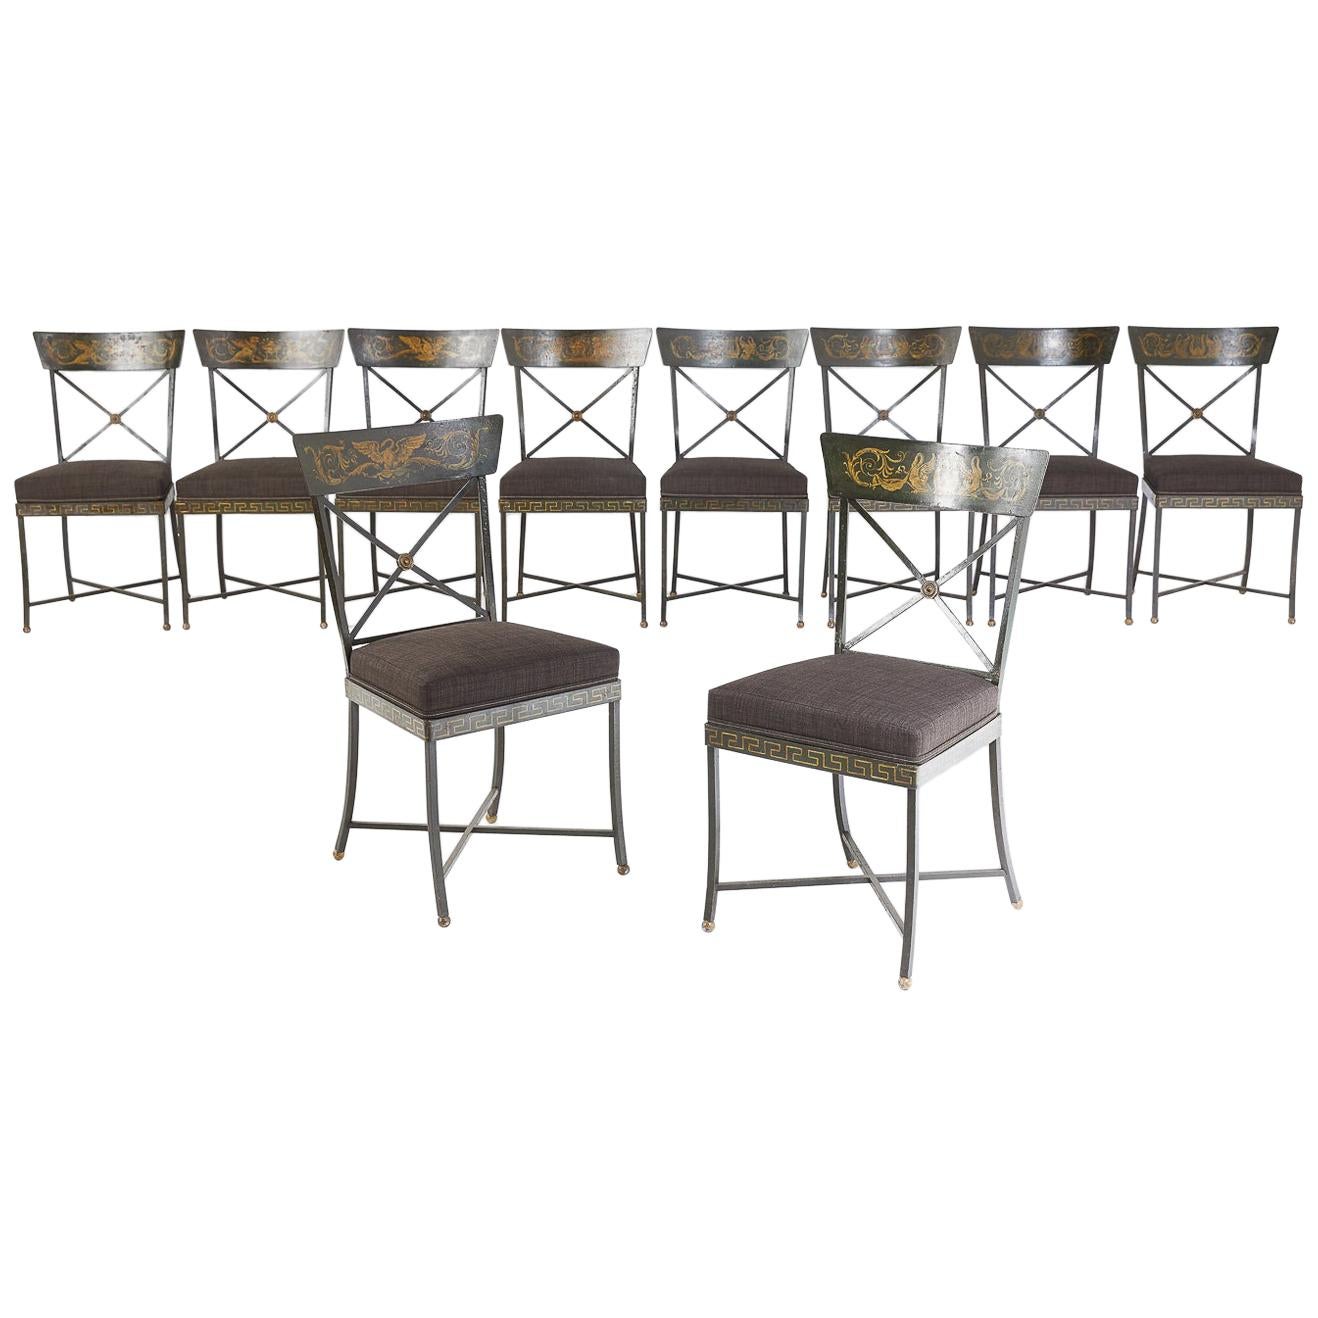 Early 20th Century Set of Ten Metal Chairs